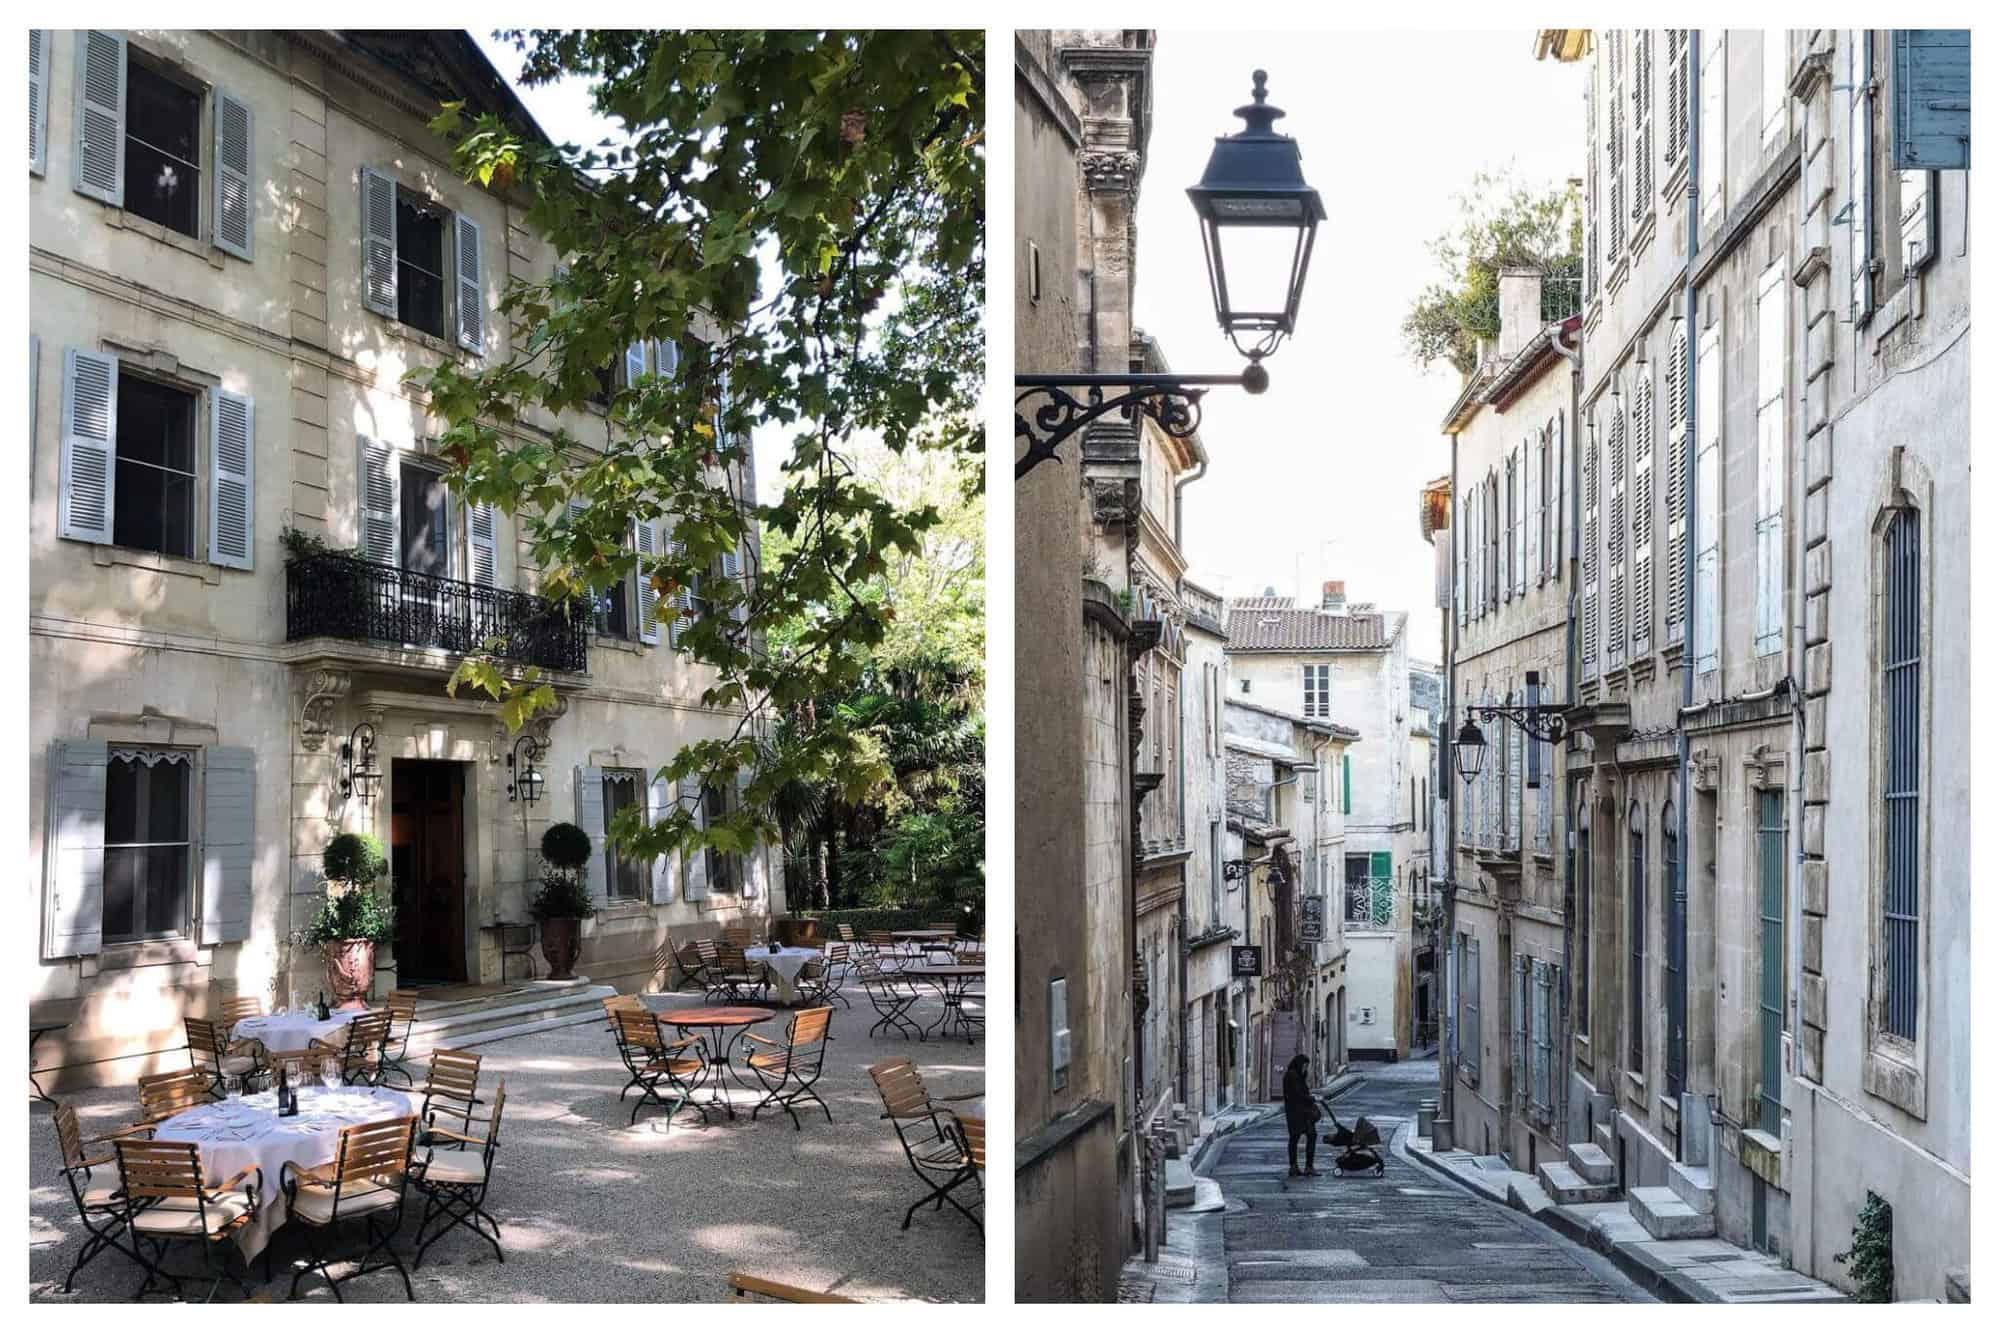 On the left is an alfresco-styled restaurant (in Lurs, France) outside a provincial mansion with groups of wooden tables and chairs under the shade of a tree. On the right is a narrow village street in Provence, France, with a woman walking in her black coat and jeans and she is pushing a baby stroller.
